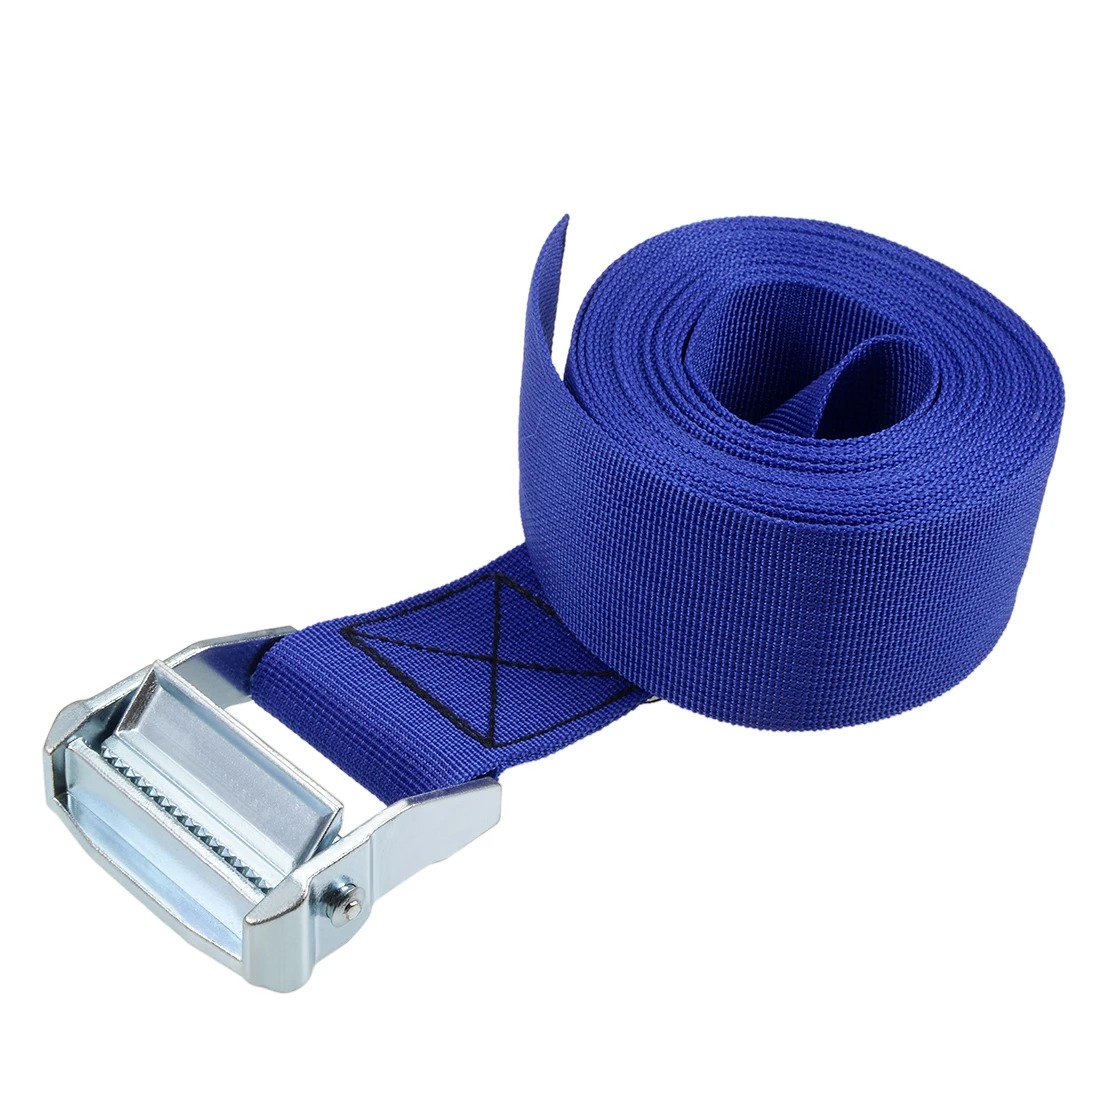 

uxcell 4.5M x 5cm Lashing Strap Cargo Tie Down Straps with Cam Lock Buckle 500Kg Work Load, Blue